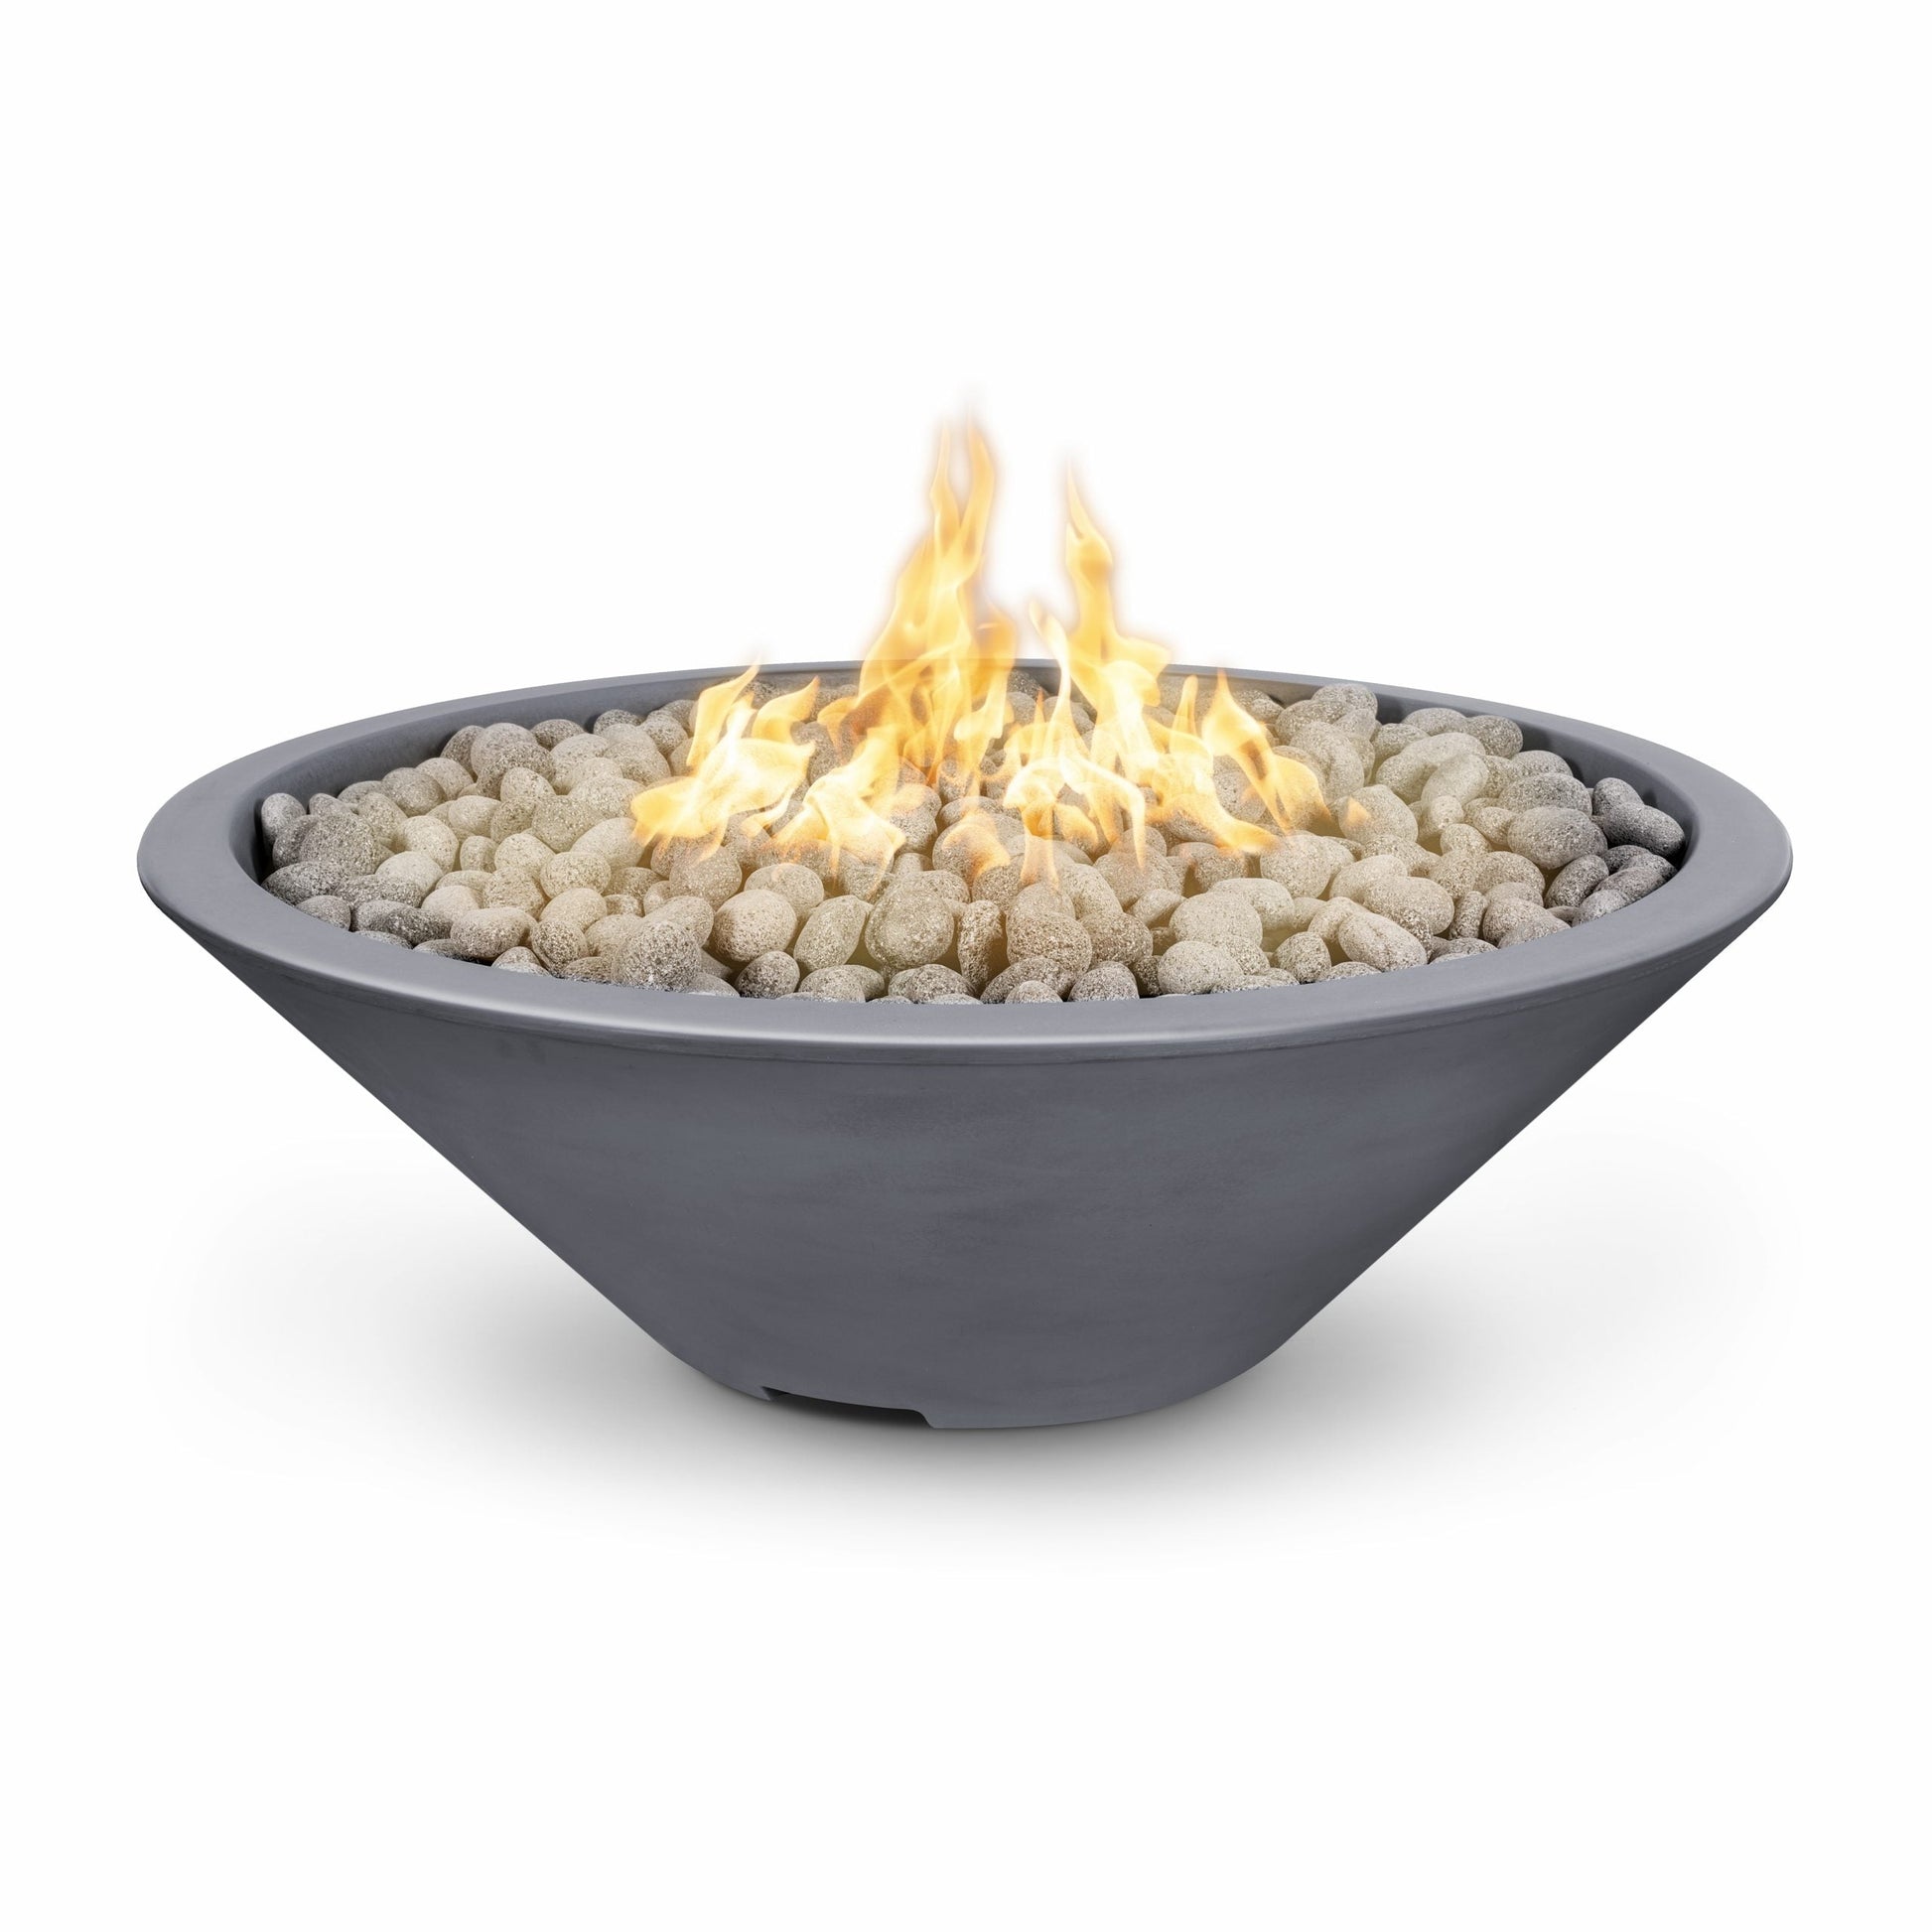 The Outdoor Plus Round Cazo 48" White Powder Coated Metal Liquid Propane Fire Pit with 12V Electronic Ignition